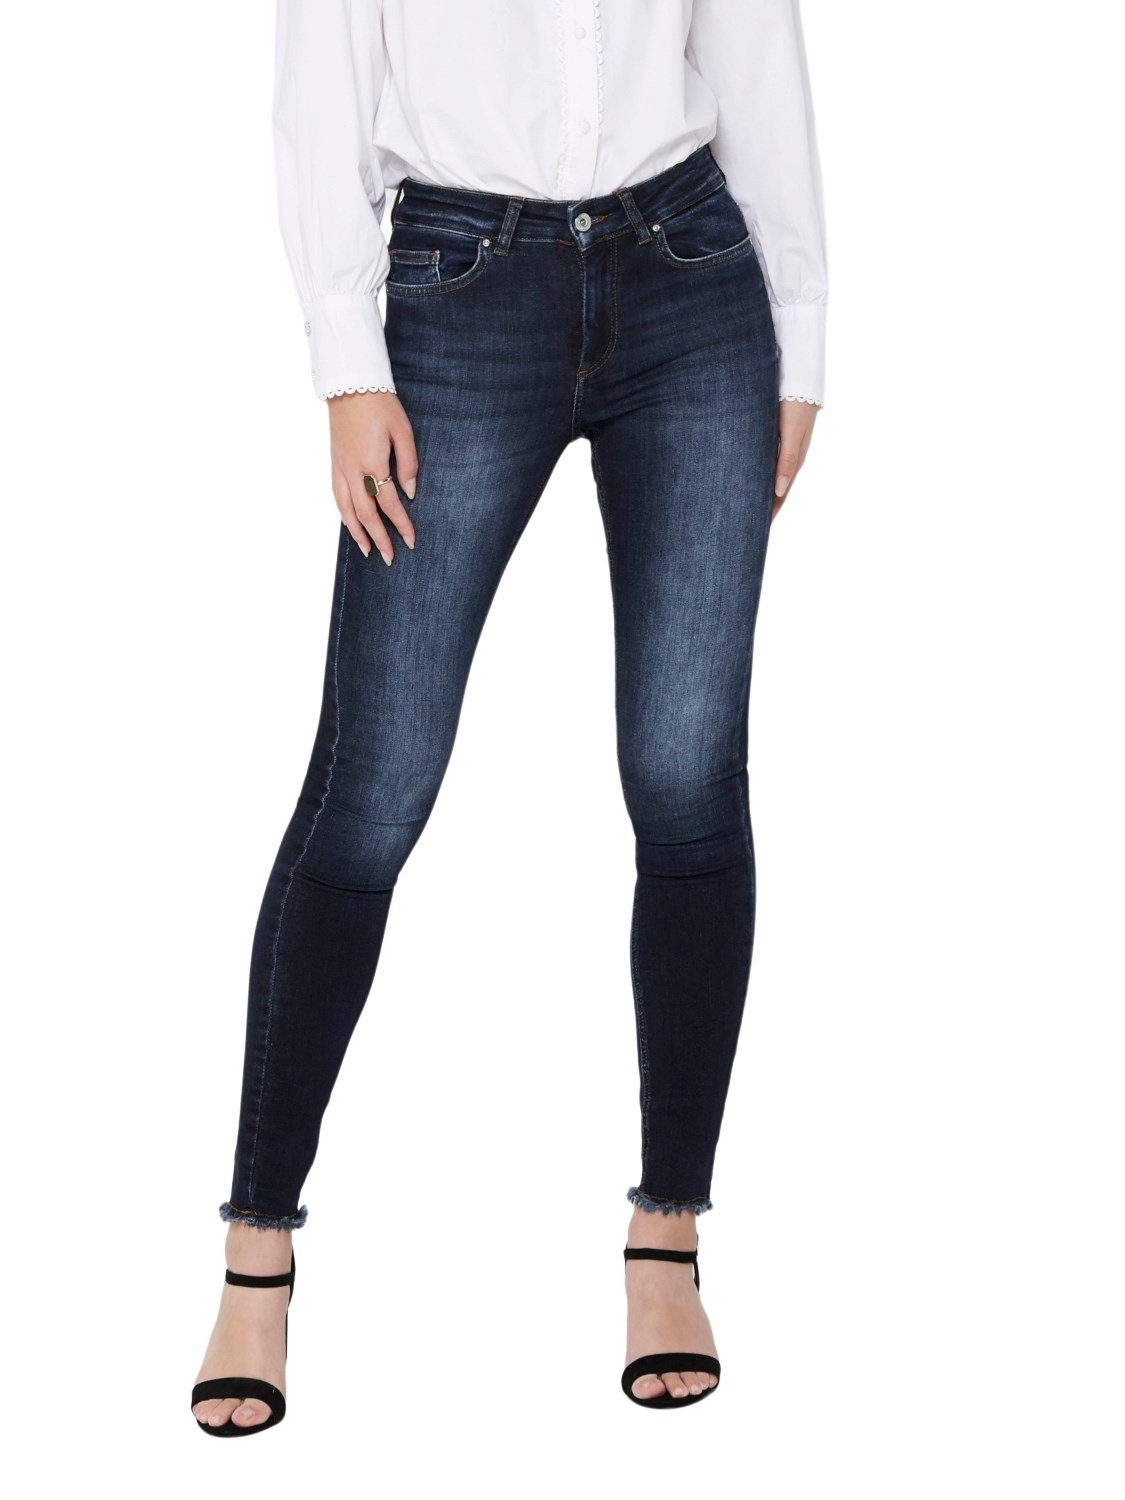 ANK RW ONLBLUSH mit LIFE Skinny-fit-Jeans SK ONLY REA837 MID Stretch